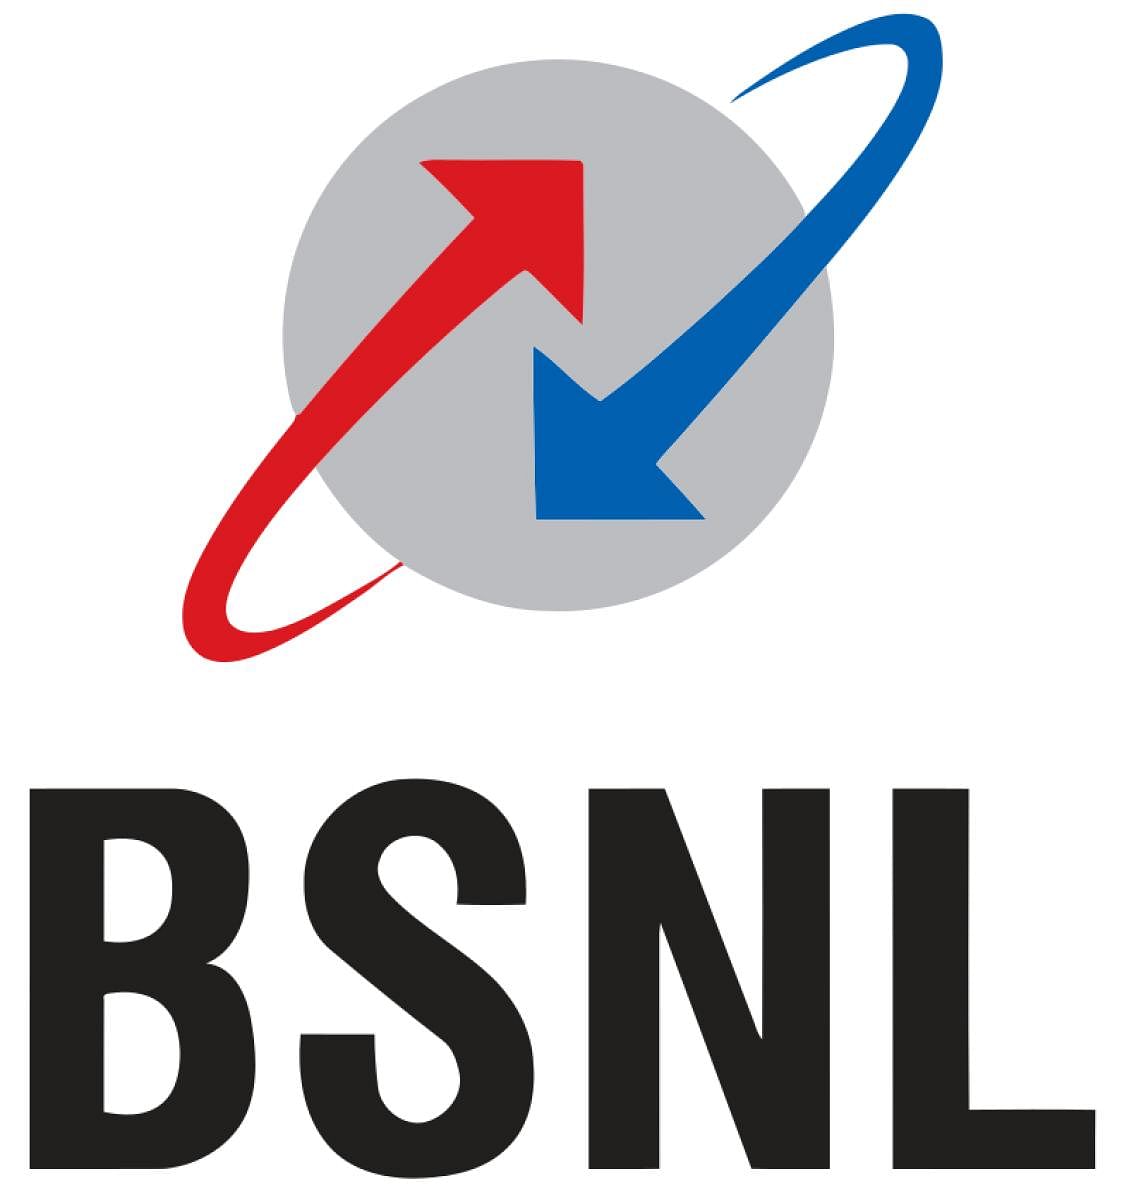 Total, one lakh BSNL employees are eligible for the Voluntary Retirement Scheme (VRS) out of its total staff strength of about 1.50 lakh. The effective date of voluntary retirement under the present scheme is January 31, 2020. DH Photo